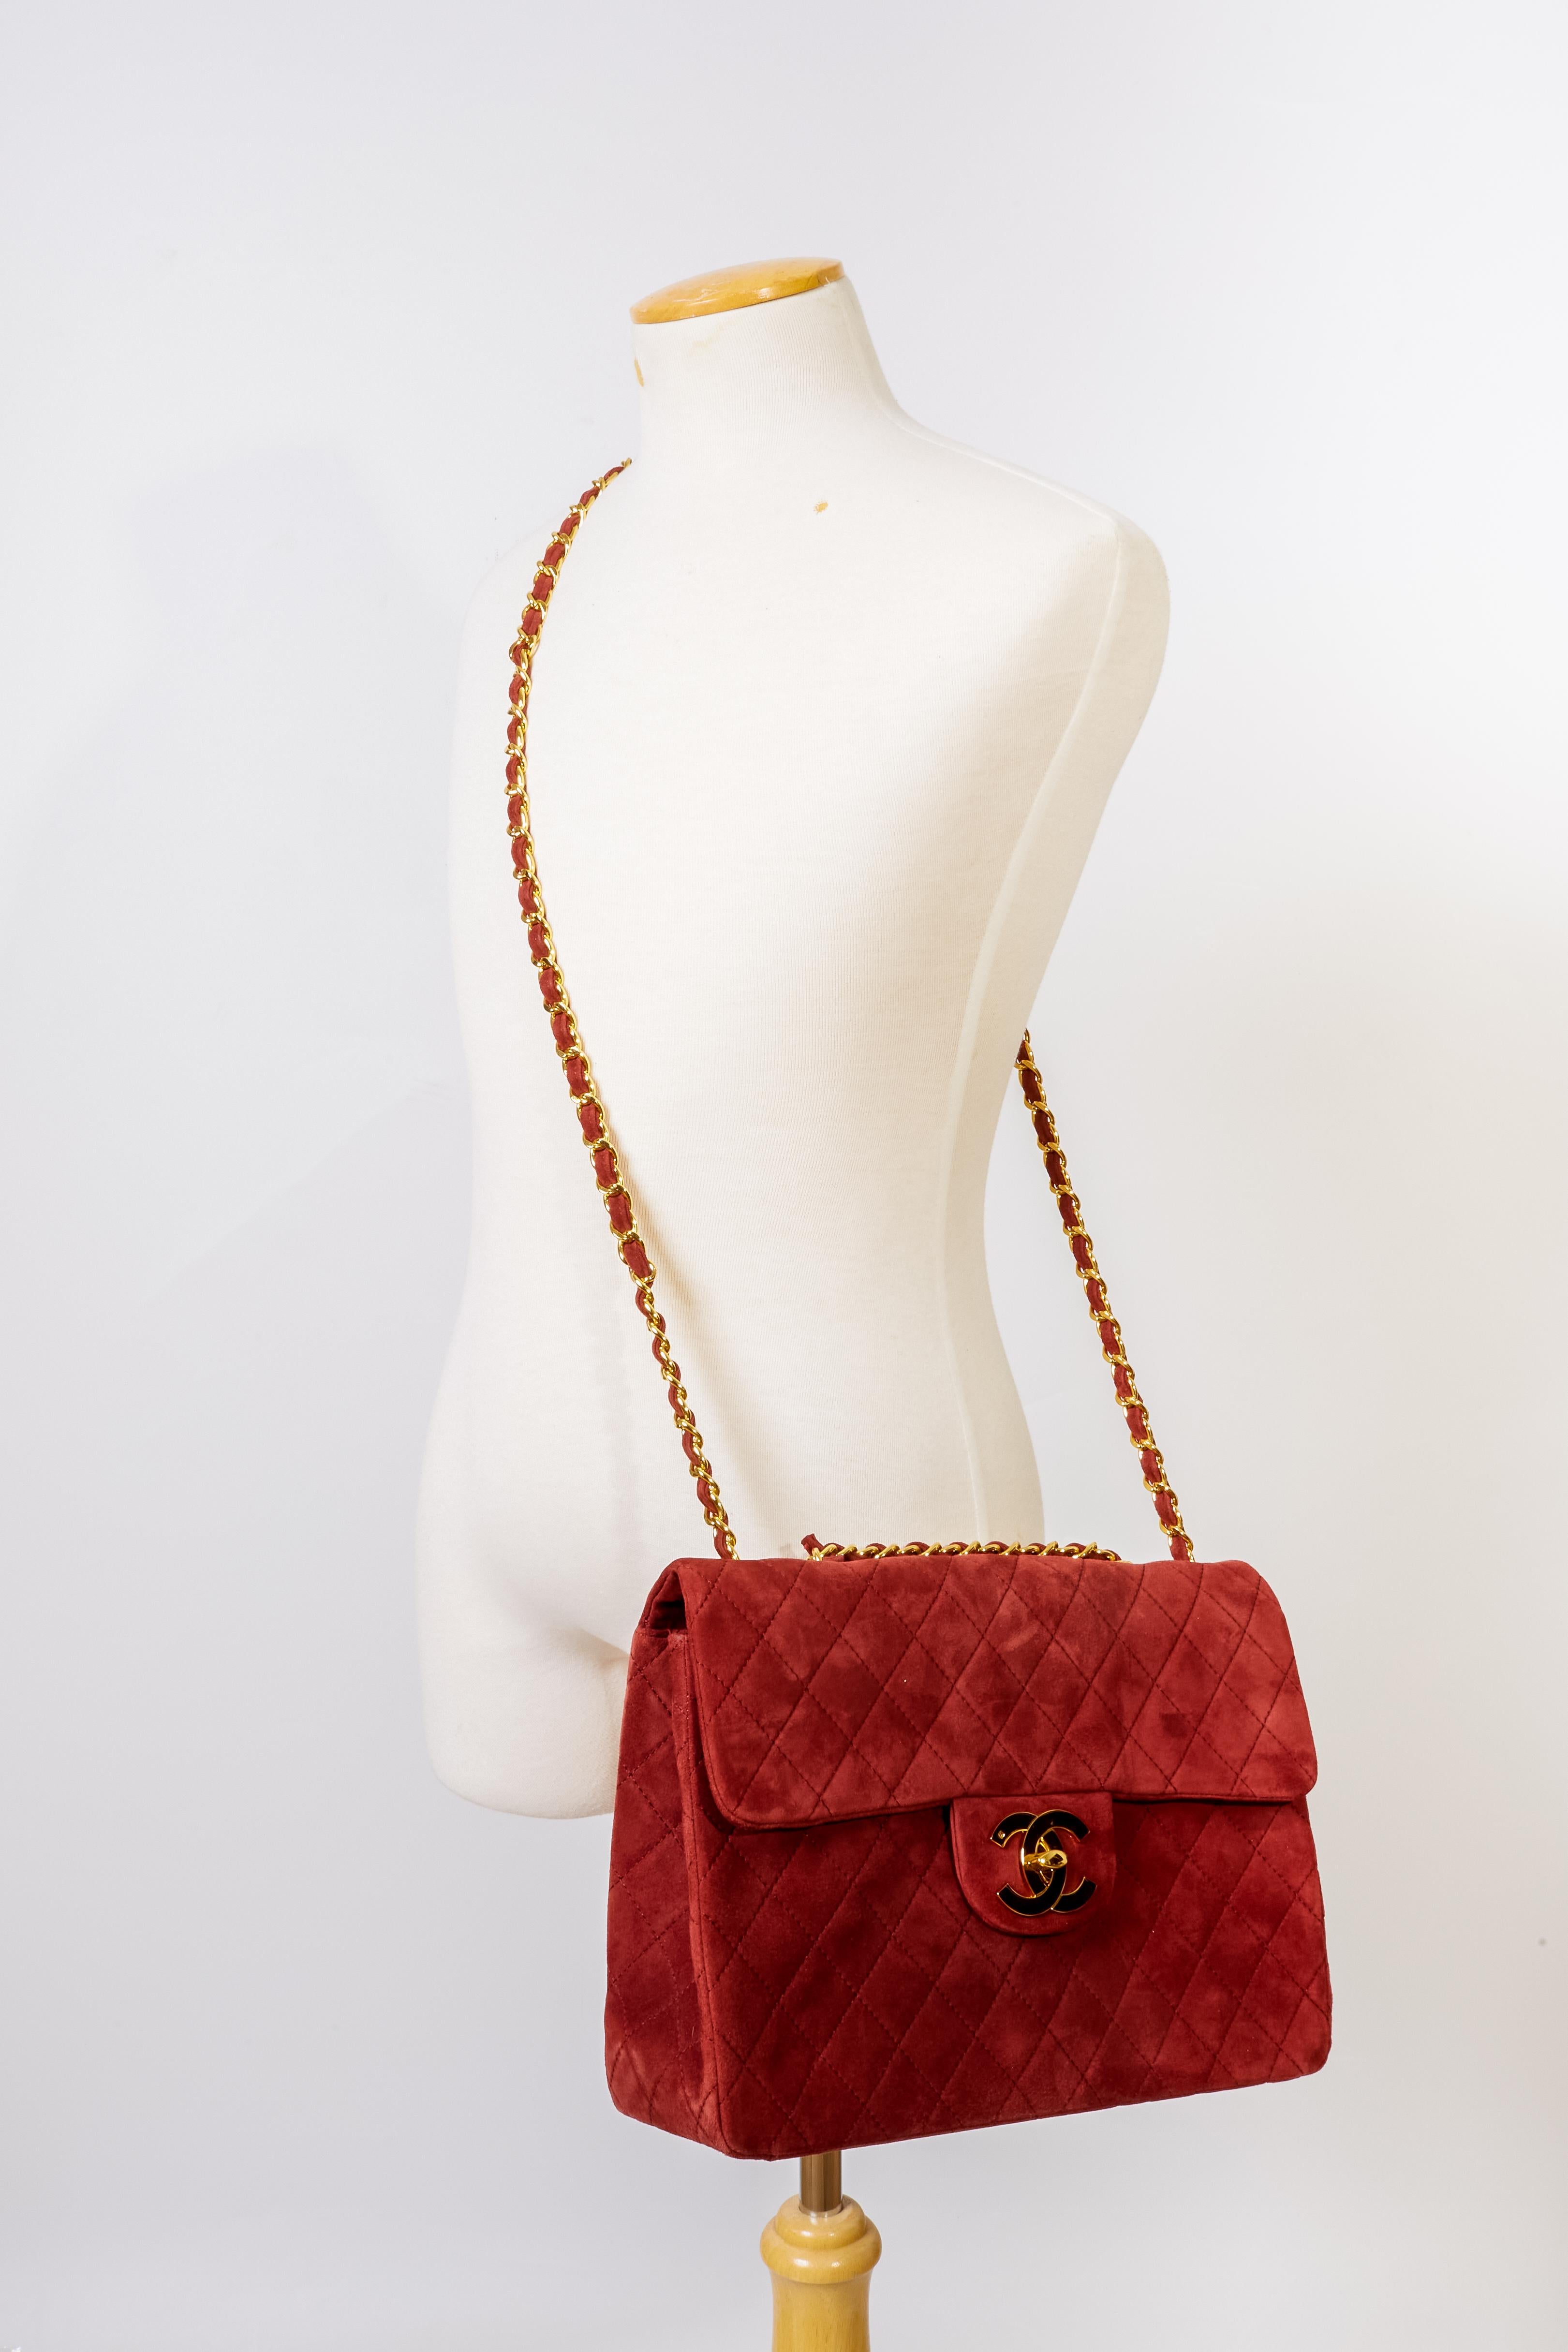 Chanel Classic Quilted Burgundy Suede Jumbo Single Flap Bag For Sale 6